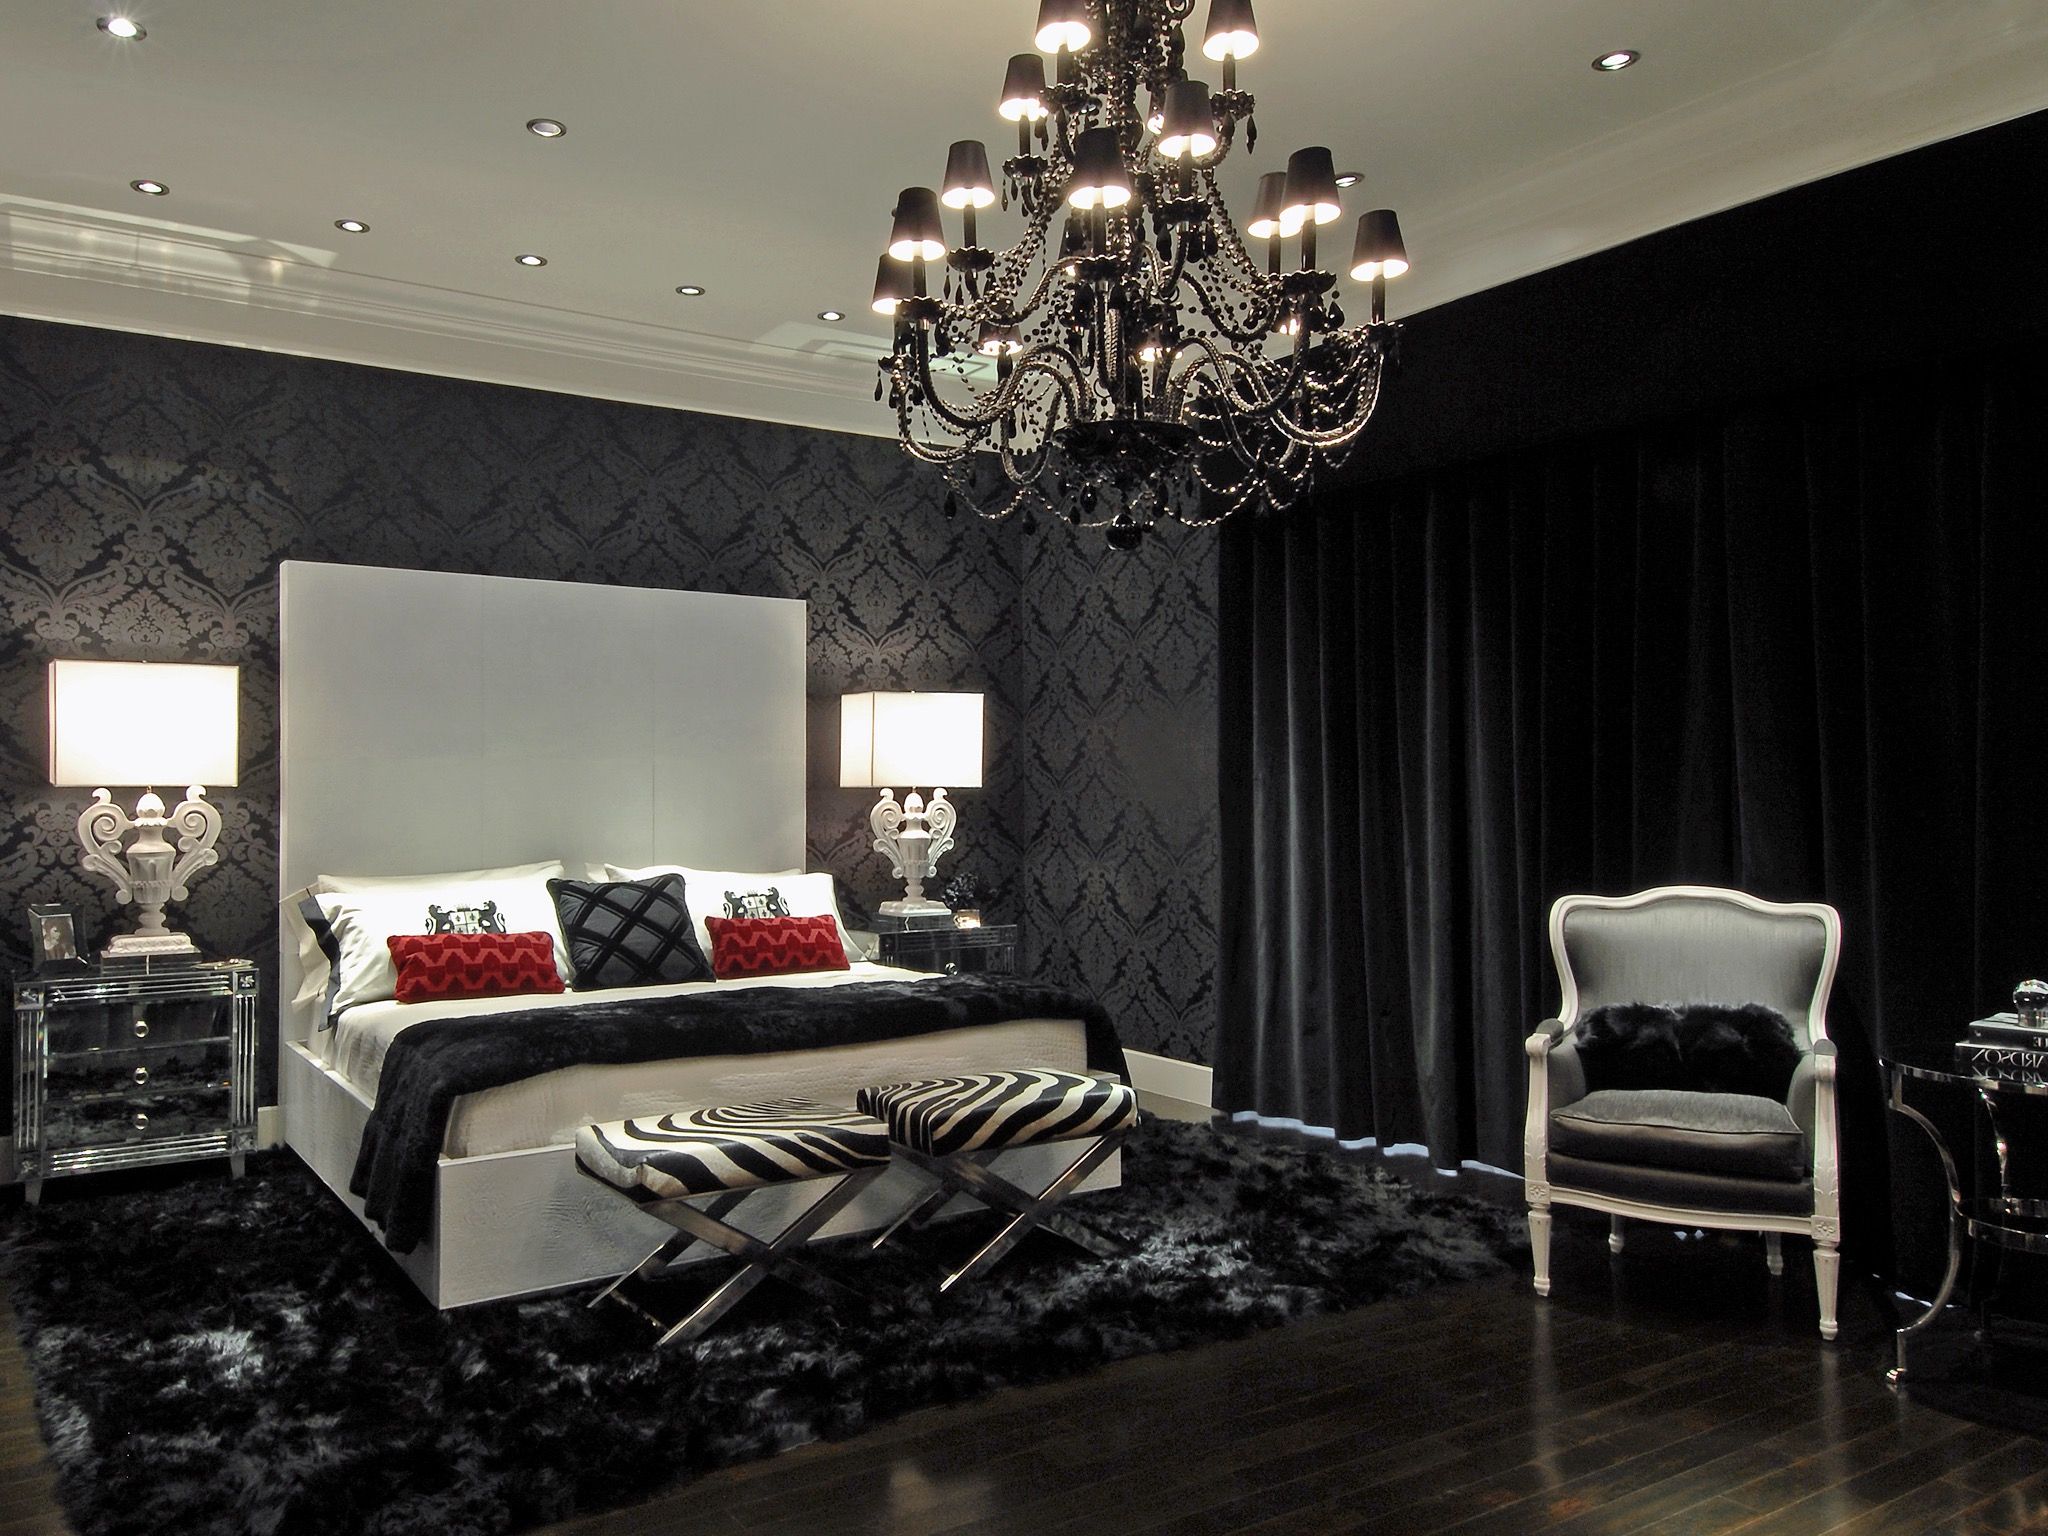 Black Gothic Bedroom With Damask Wallpaper And Black Chandelier (View 4 of 11)